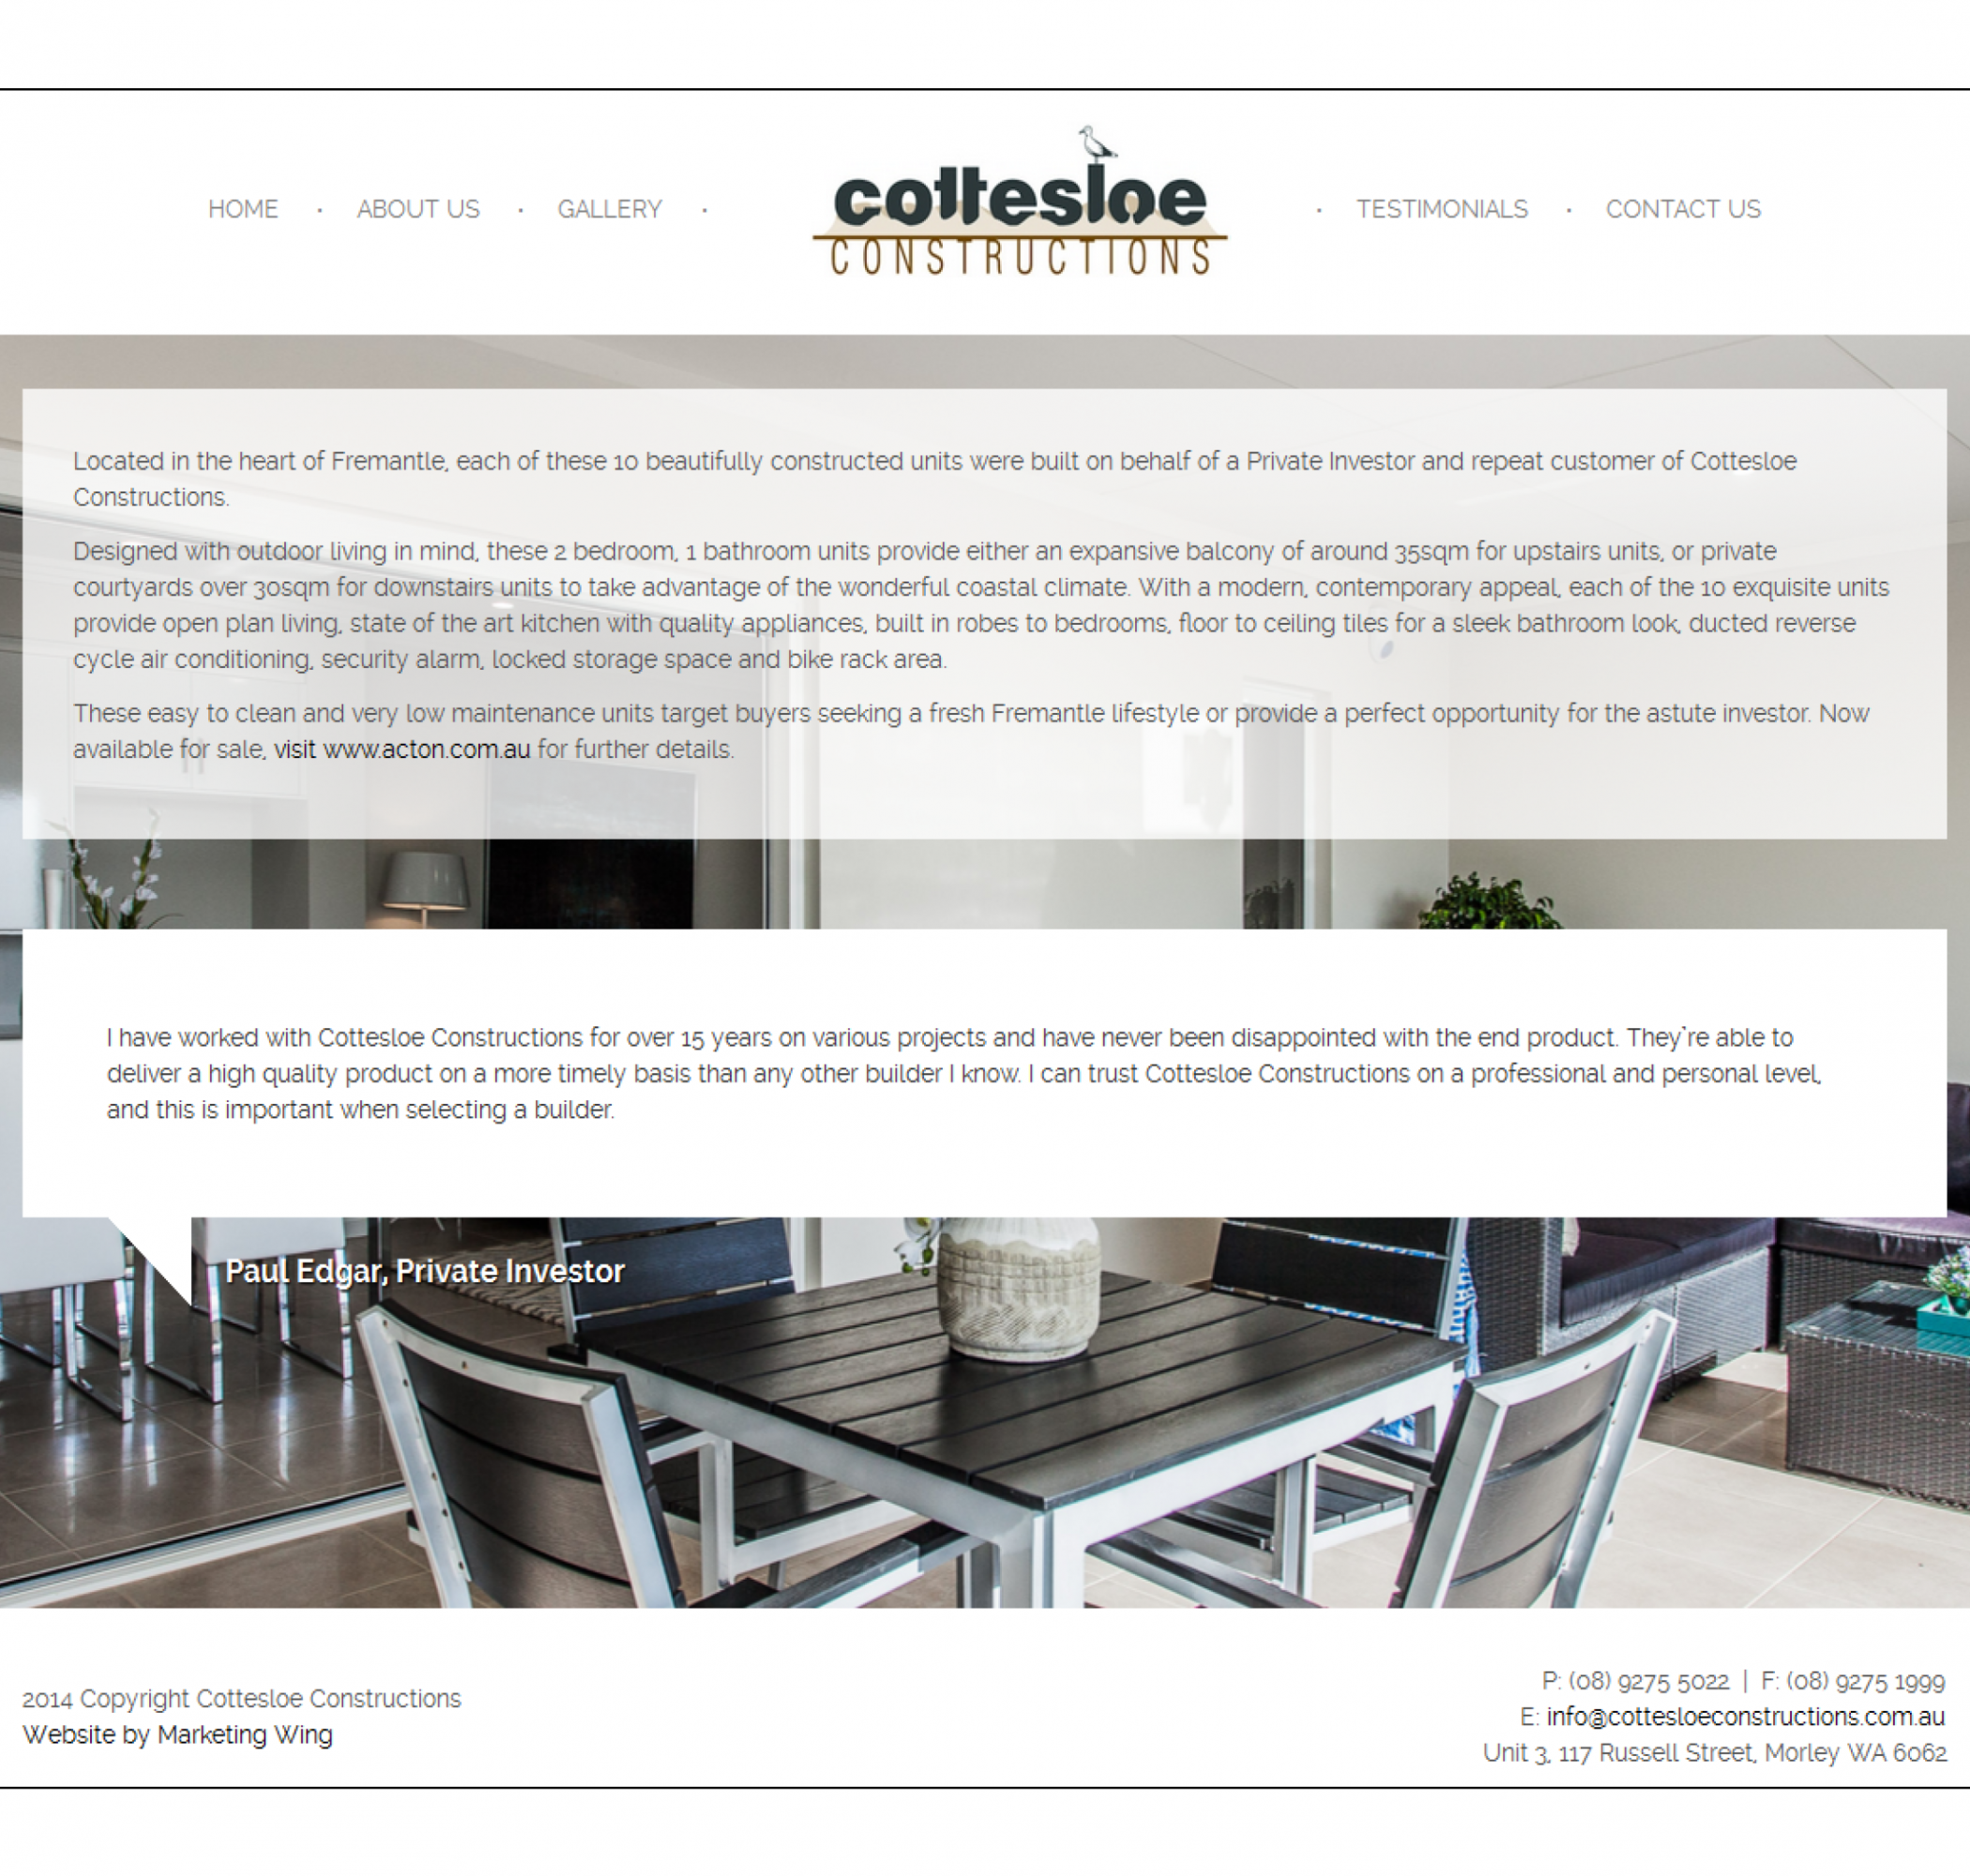 Marketing Wing website for Cottesloe Constructions